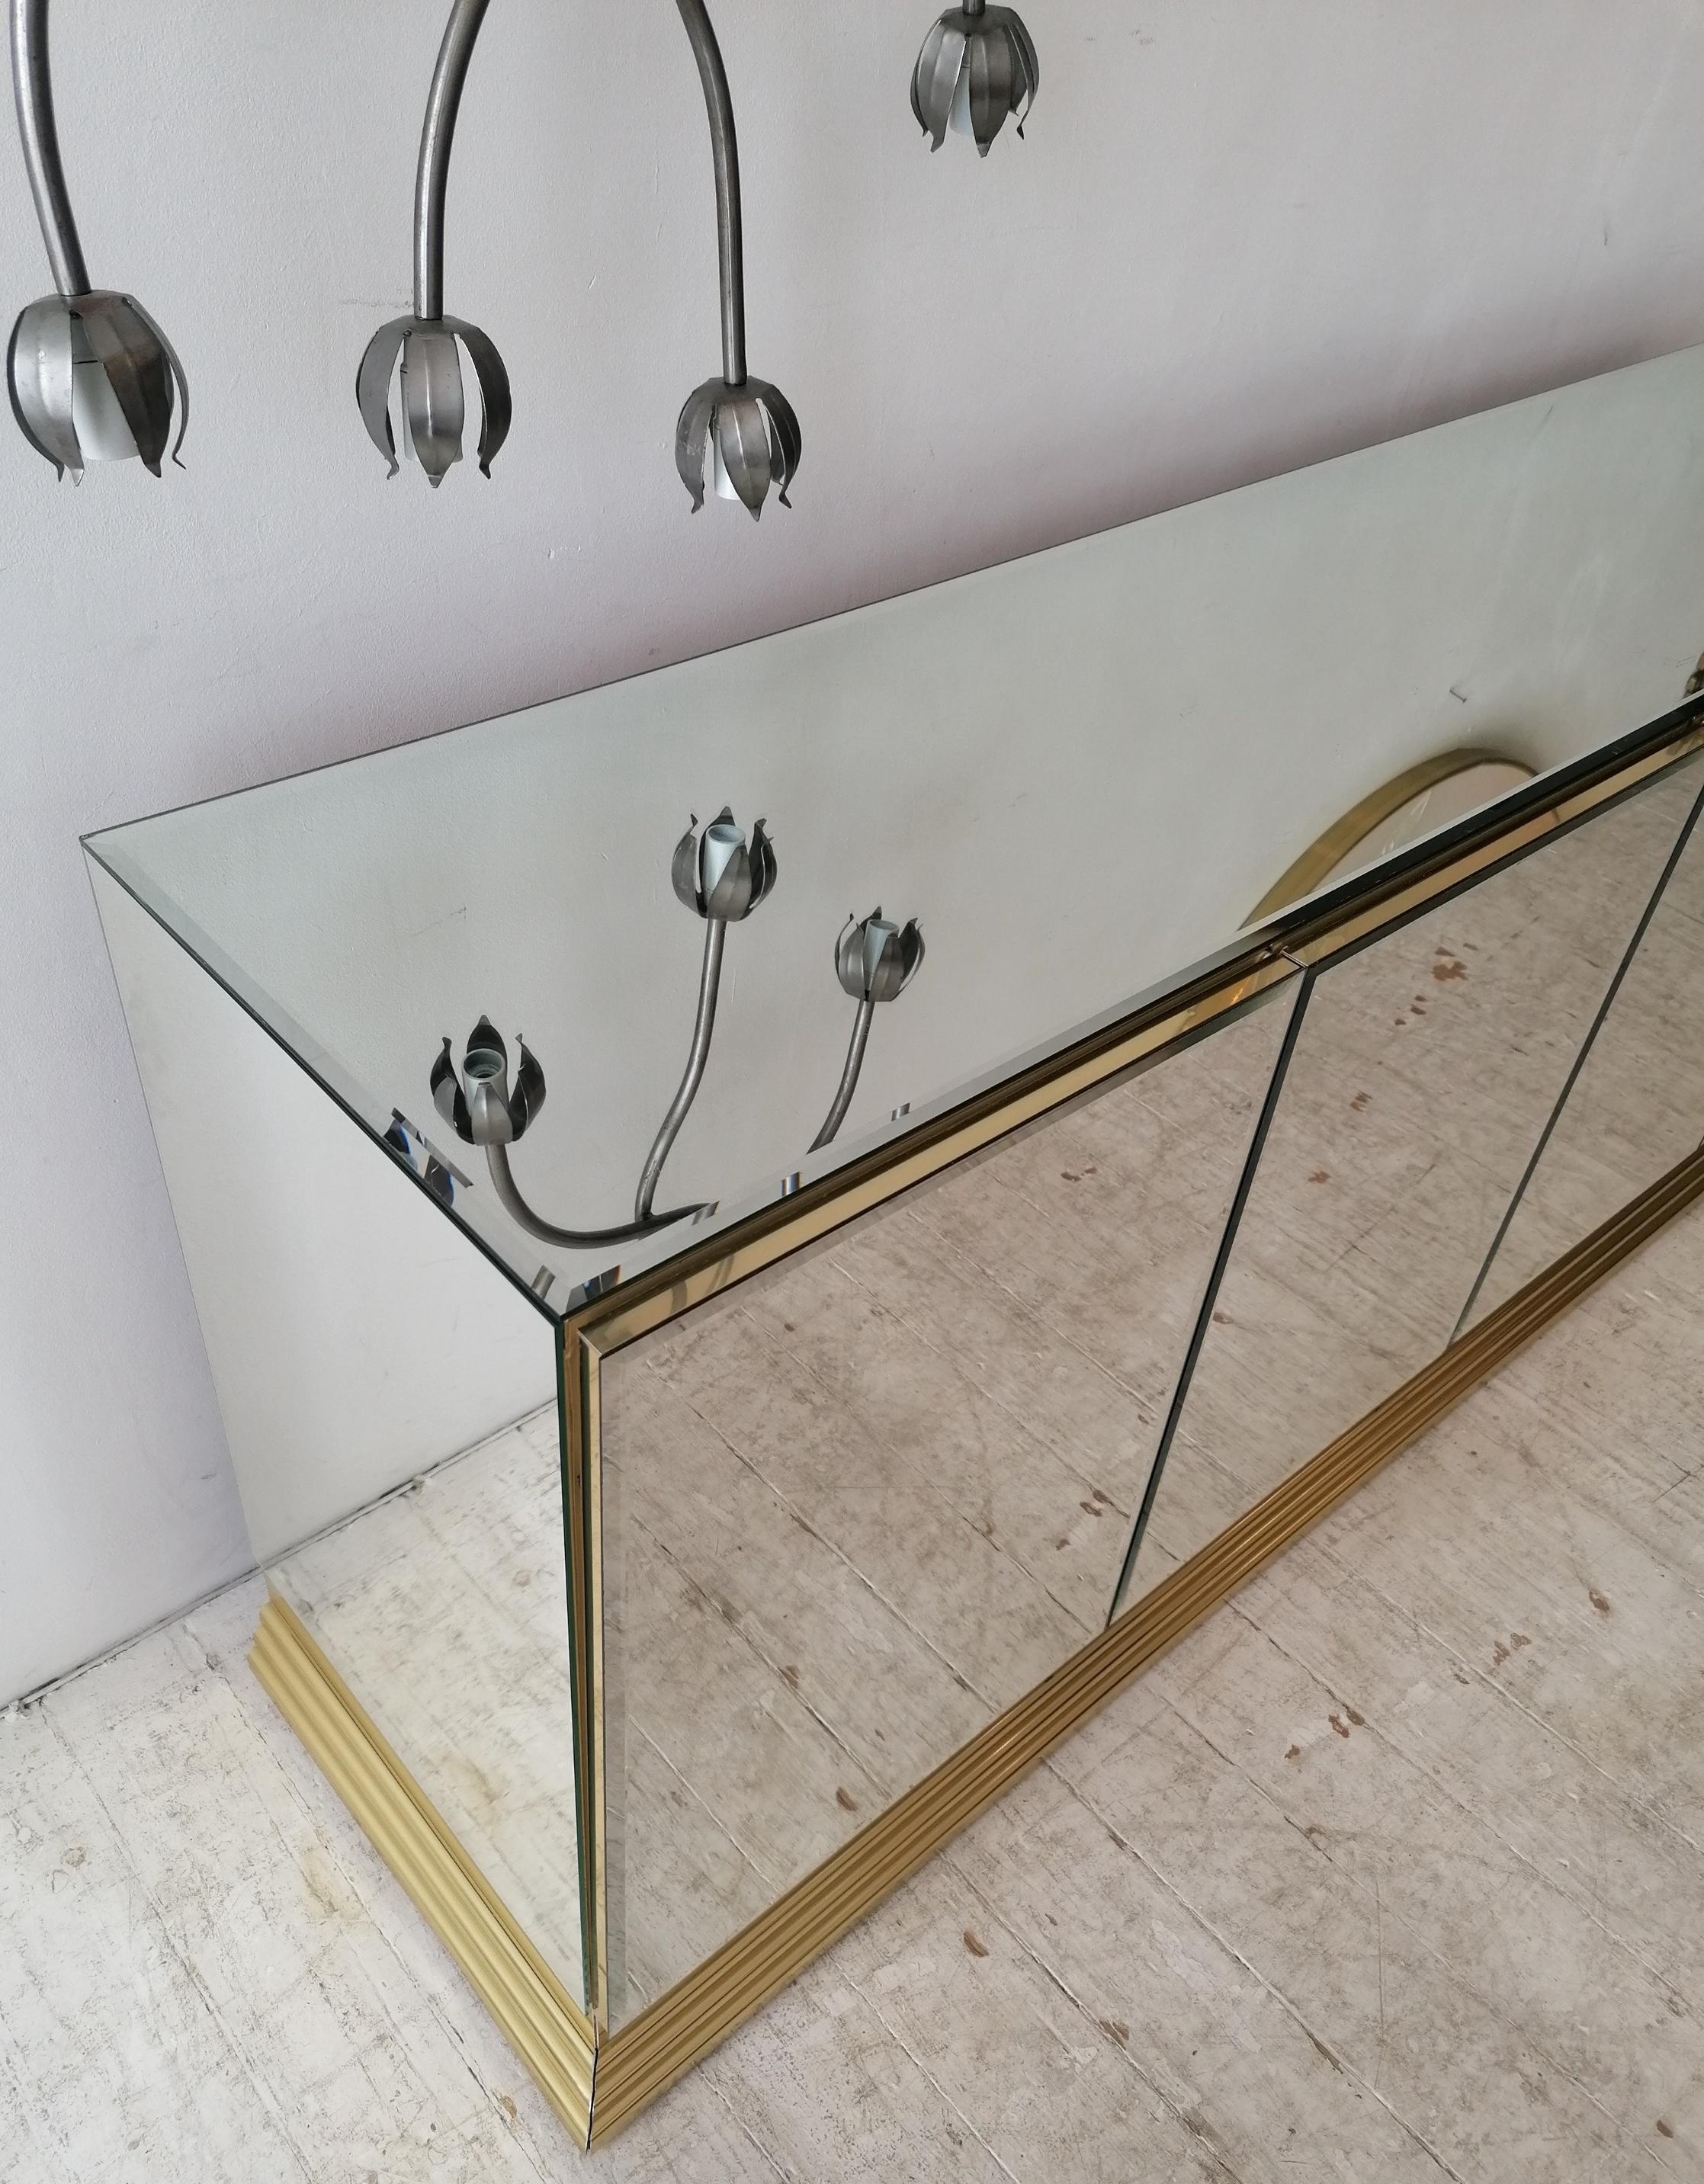 Vintage American Mirrored Glass Sideboard By Ello Furniture, 1970s 1980s 8